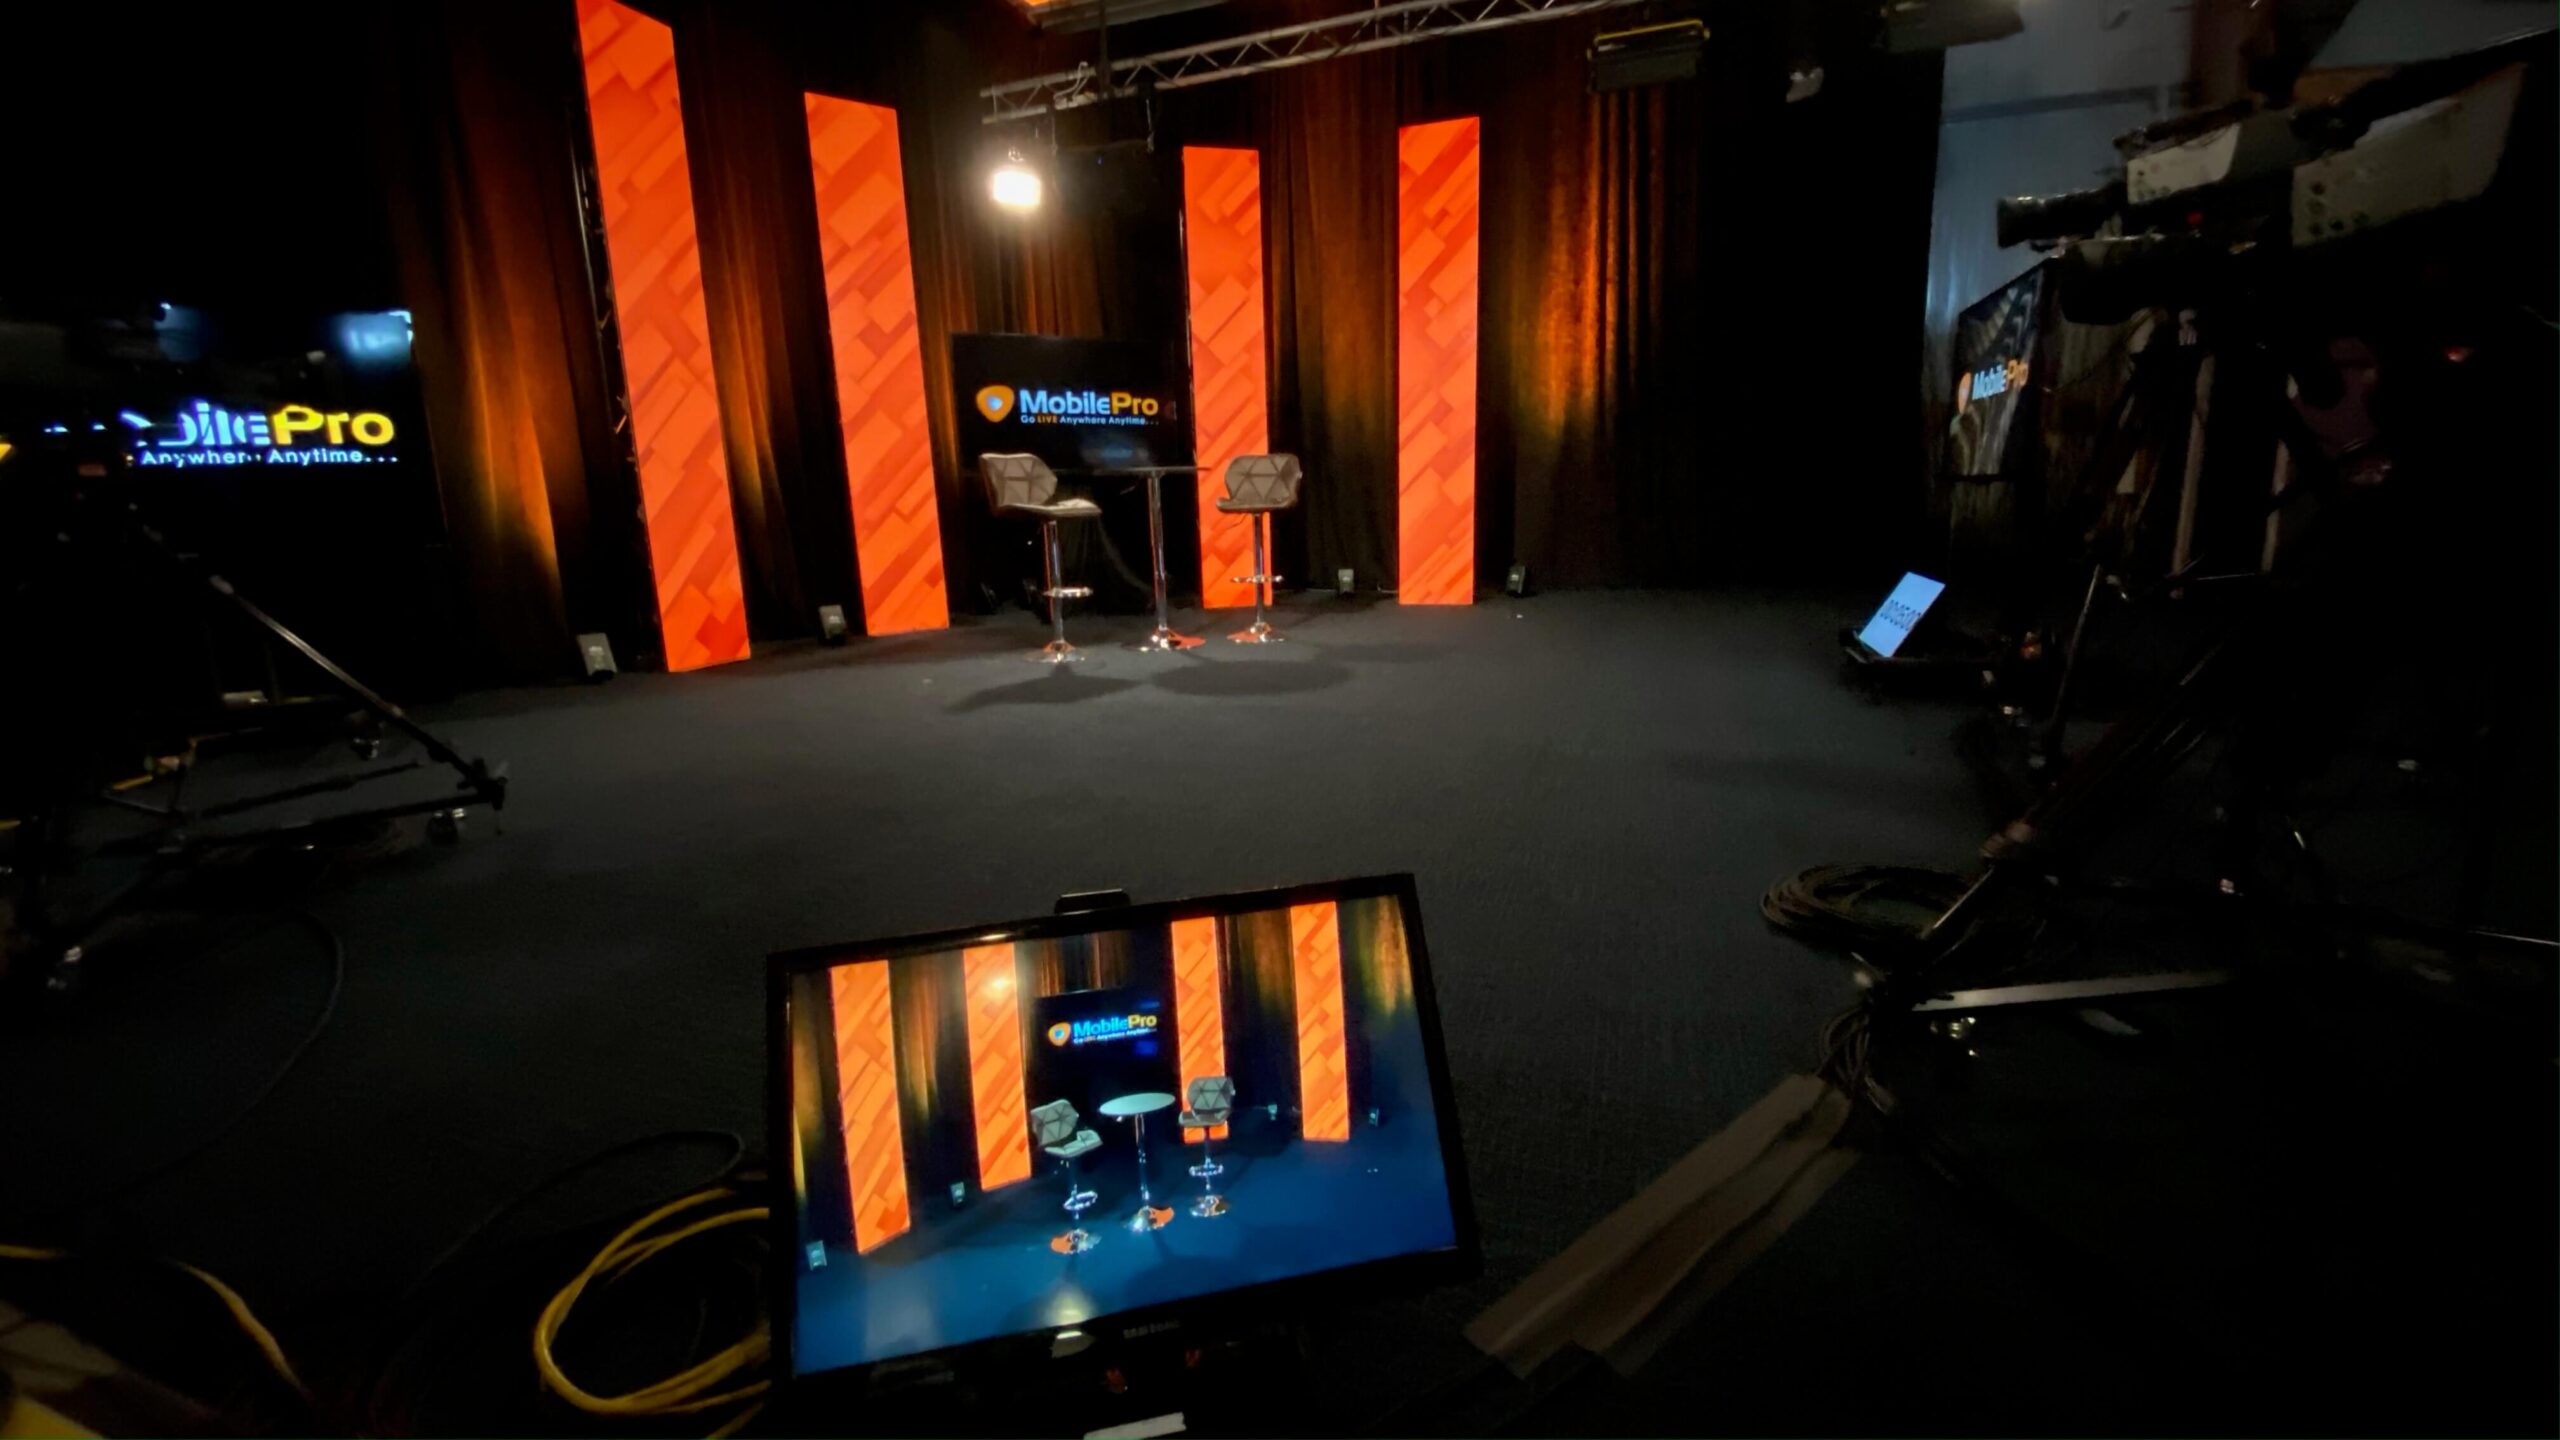 Mobile professional live streaming setup: A mobile studio with camera, lights, and audio equipment for high-quality live streaming on the go